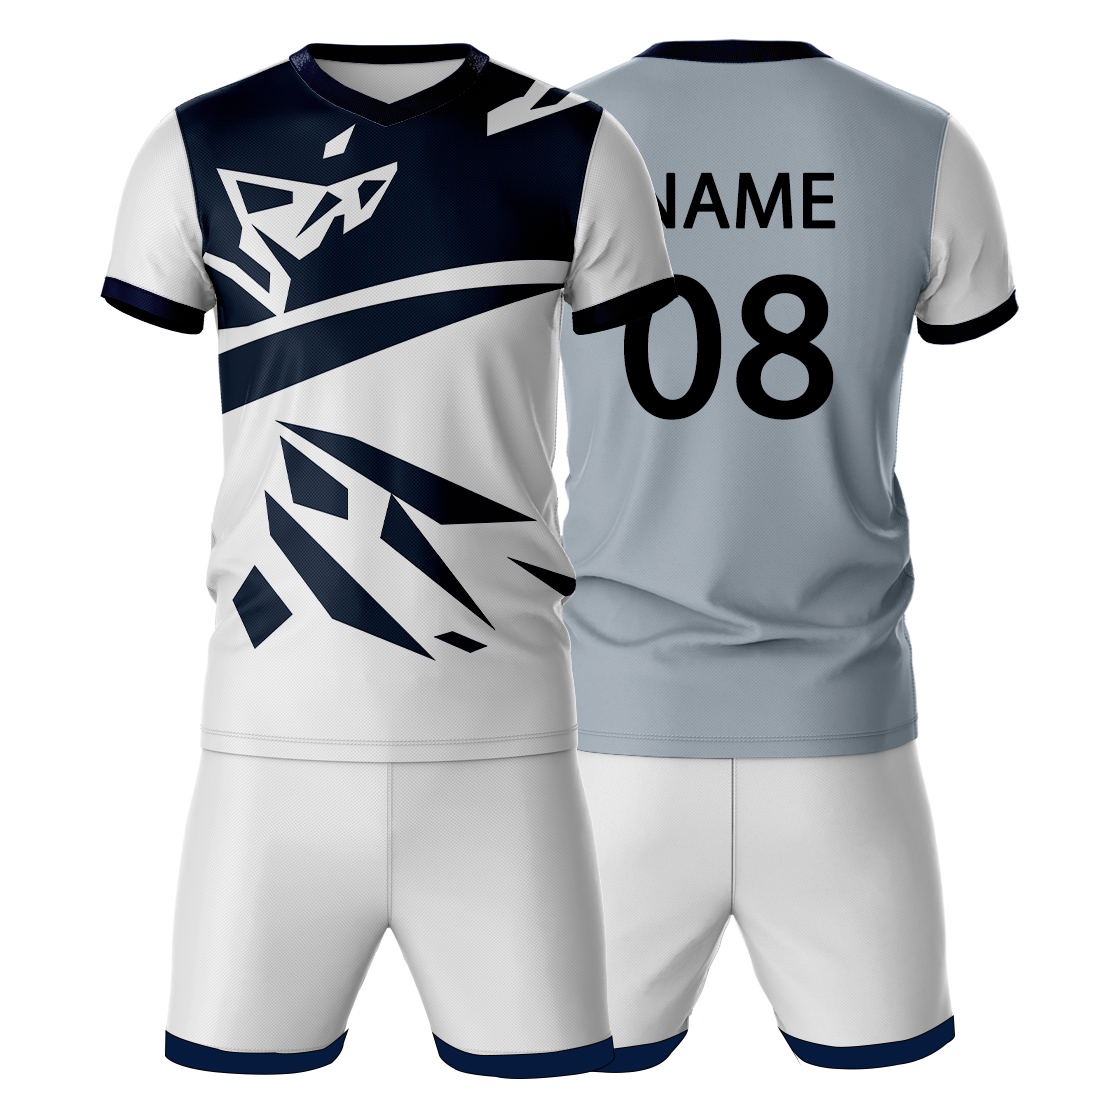 All Over Printed Jersey With Shorts Name & Number Printed.NP50000664